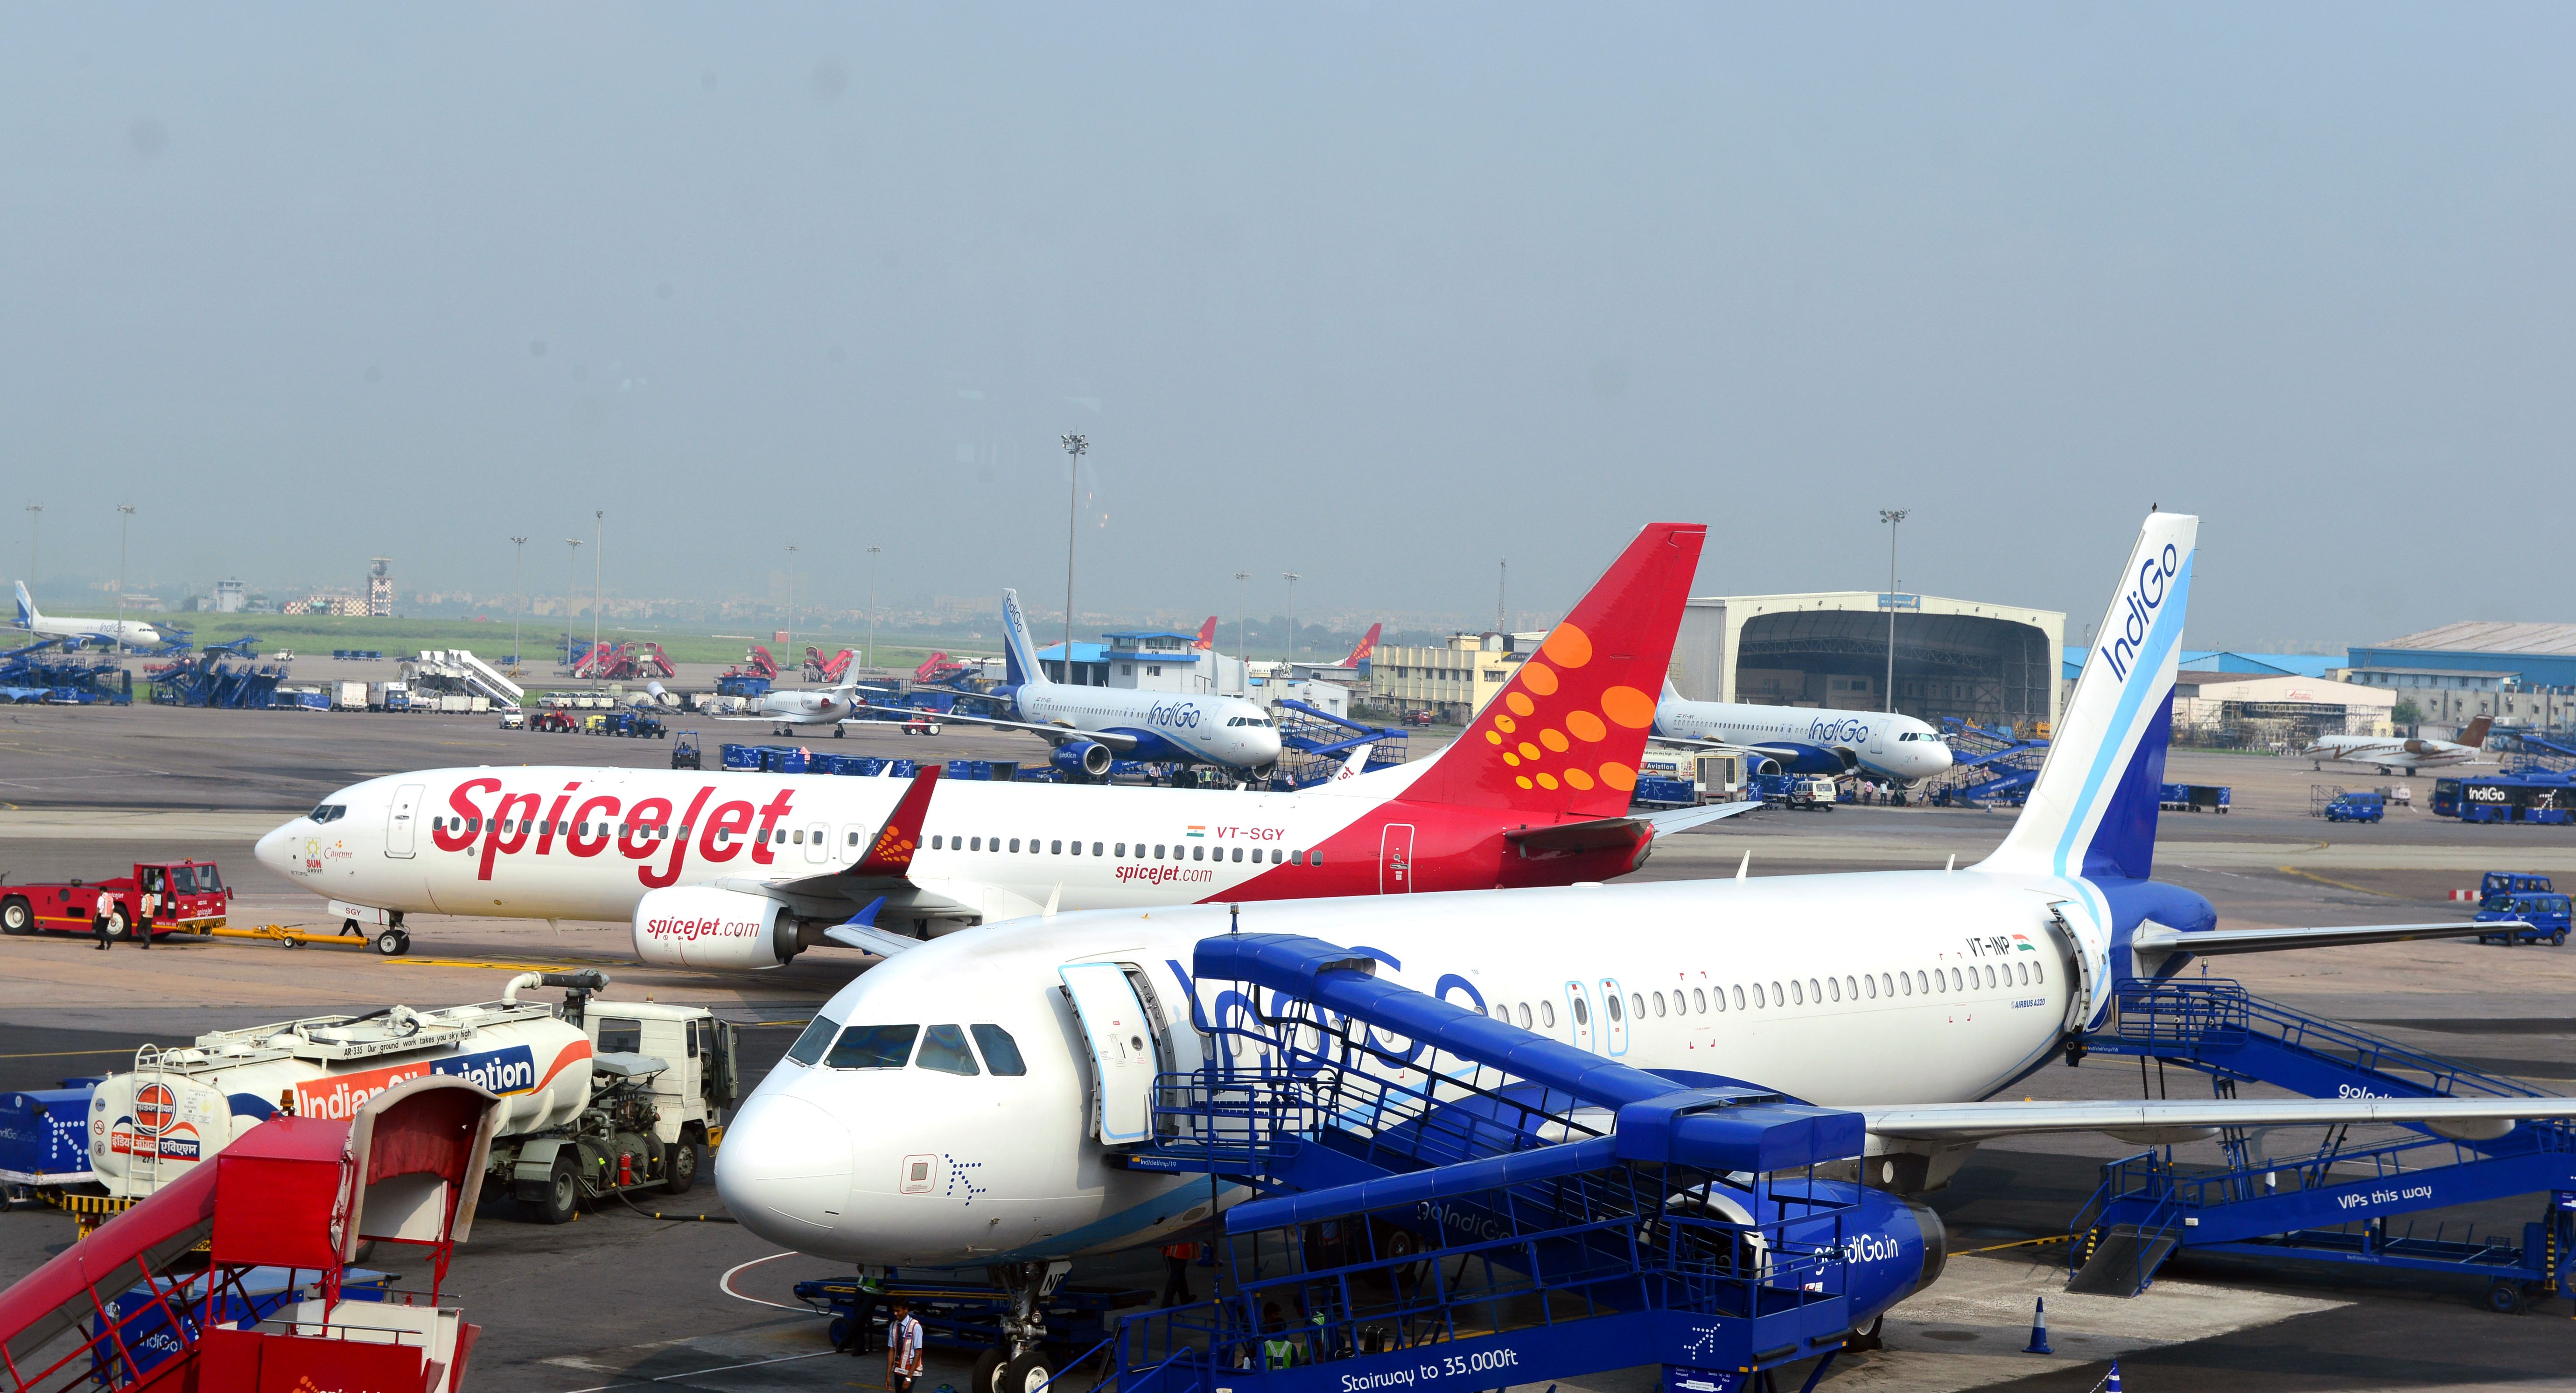 Indian Airlines at Delhi Airport